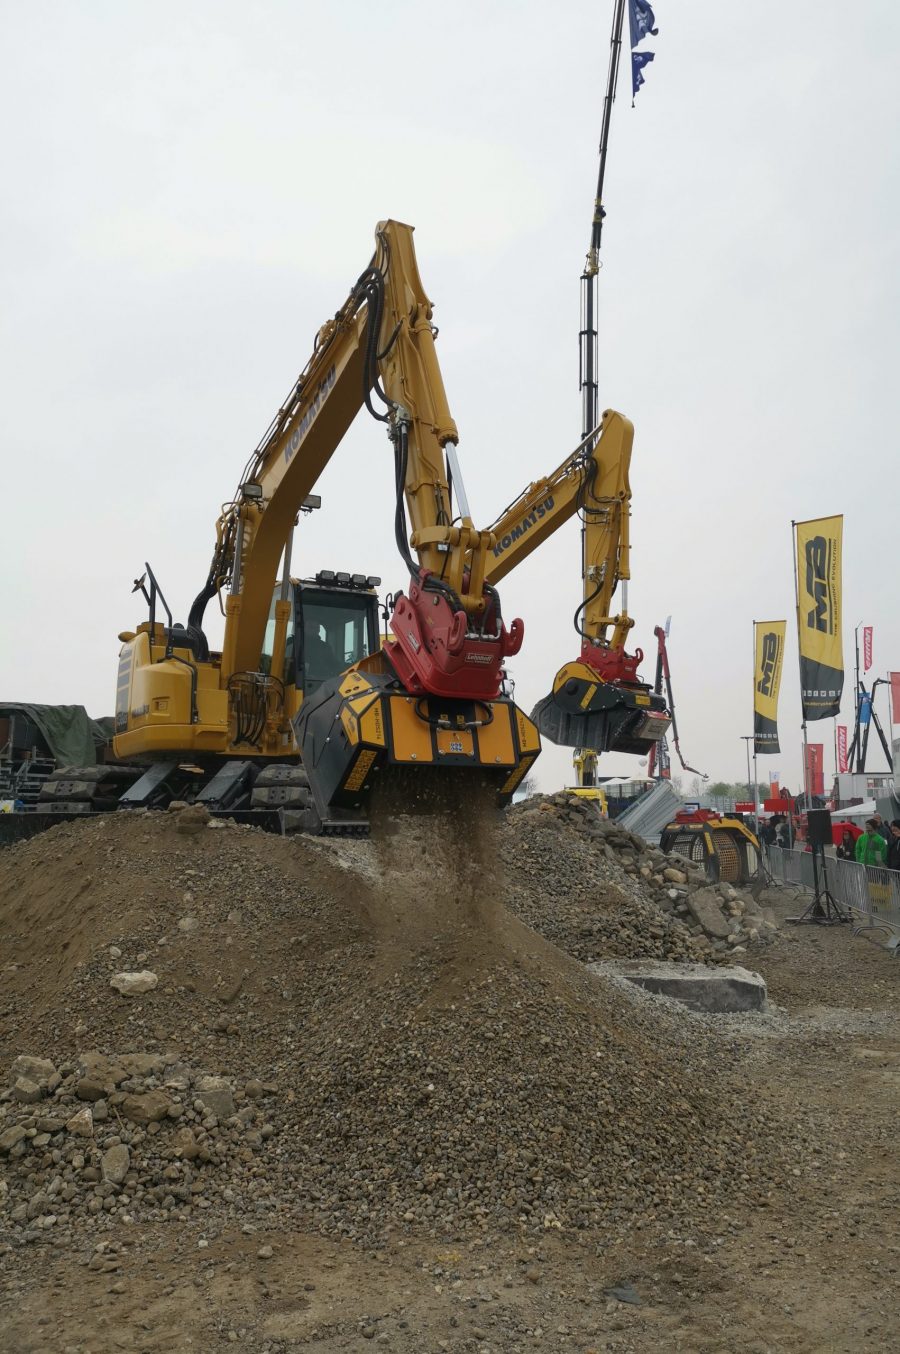 MB Crusher gears up for 2020 tour of the construction and MMT trade fairs